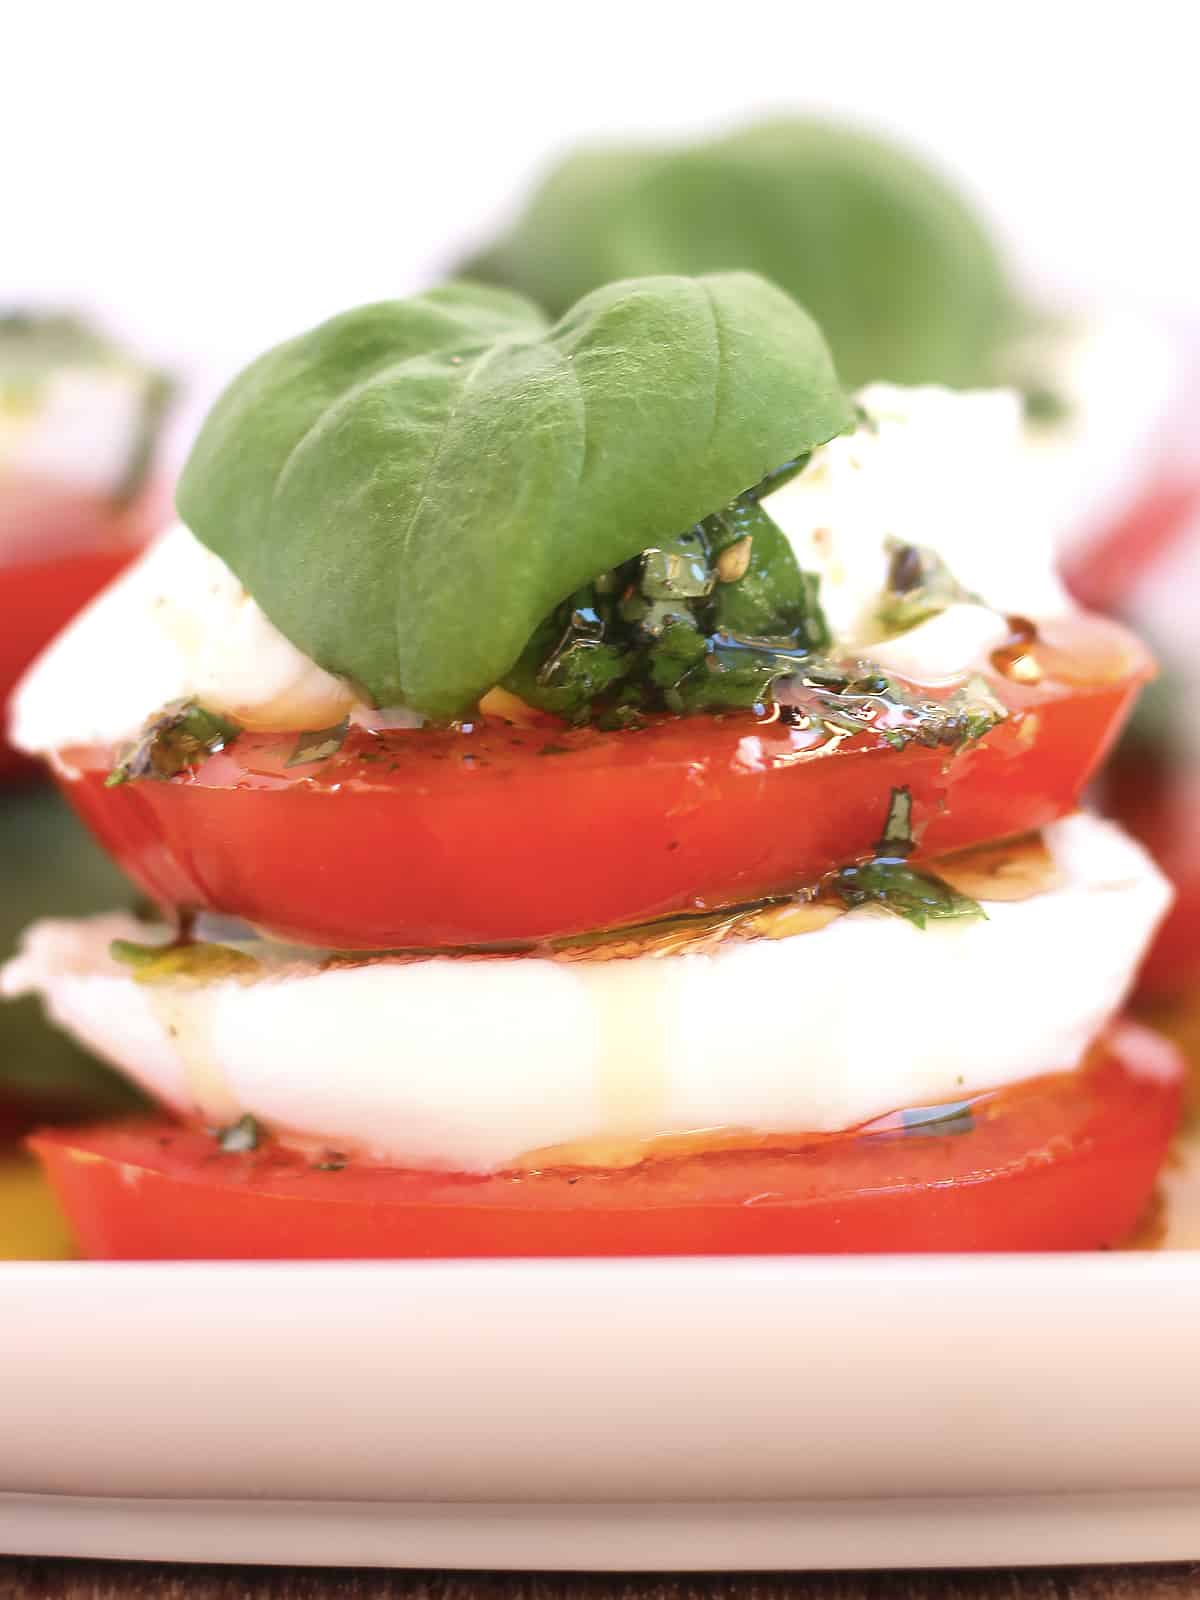 Tomato, mozzarella cheese and fresh basil drizzled with olive oil.